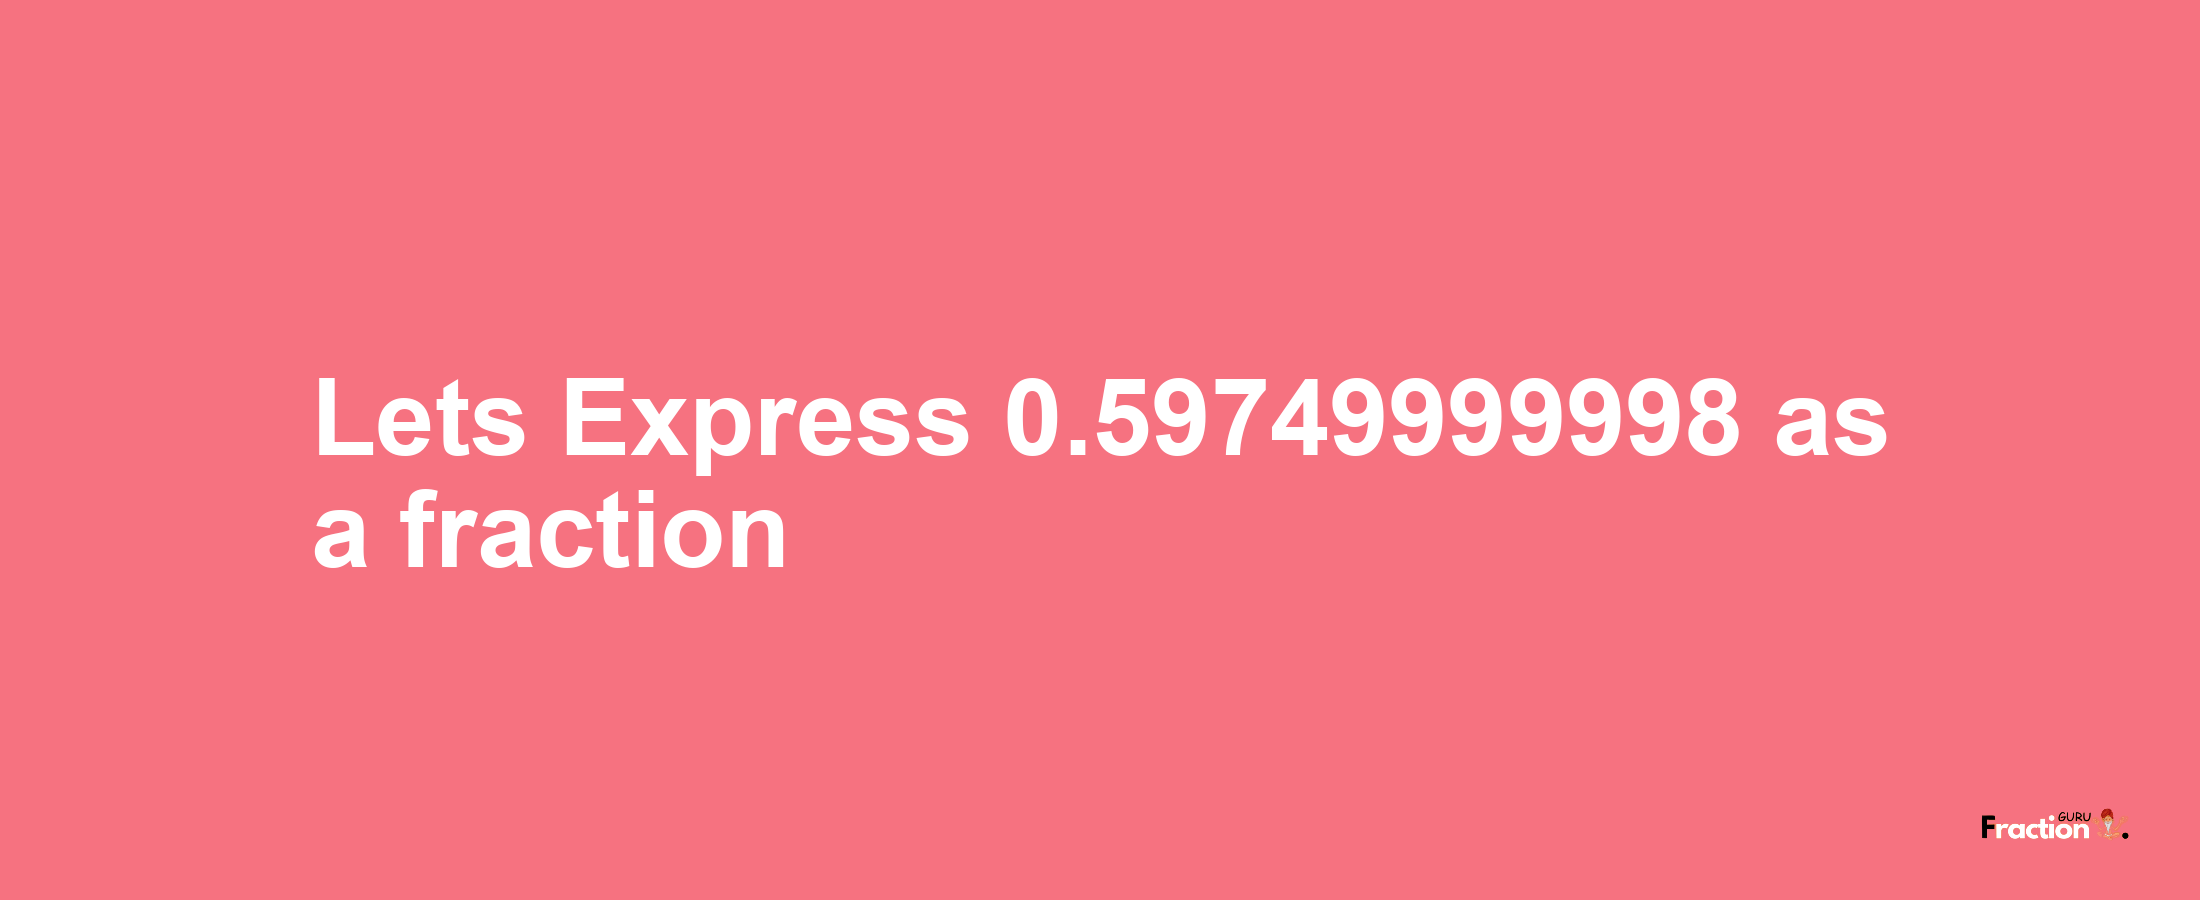 Lets Express 0.59749999998 as afraction